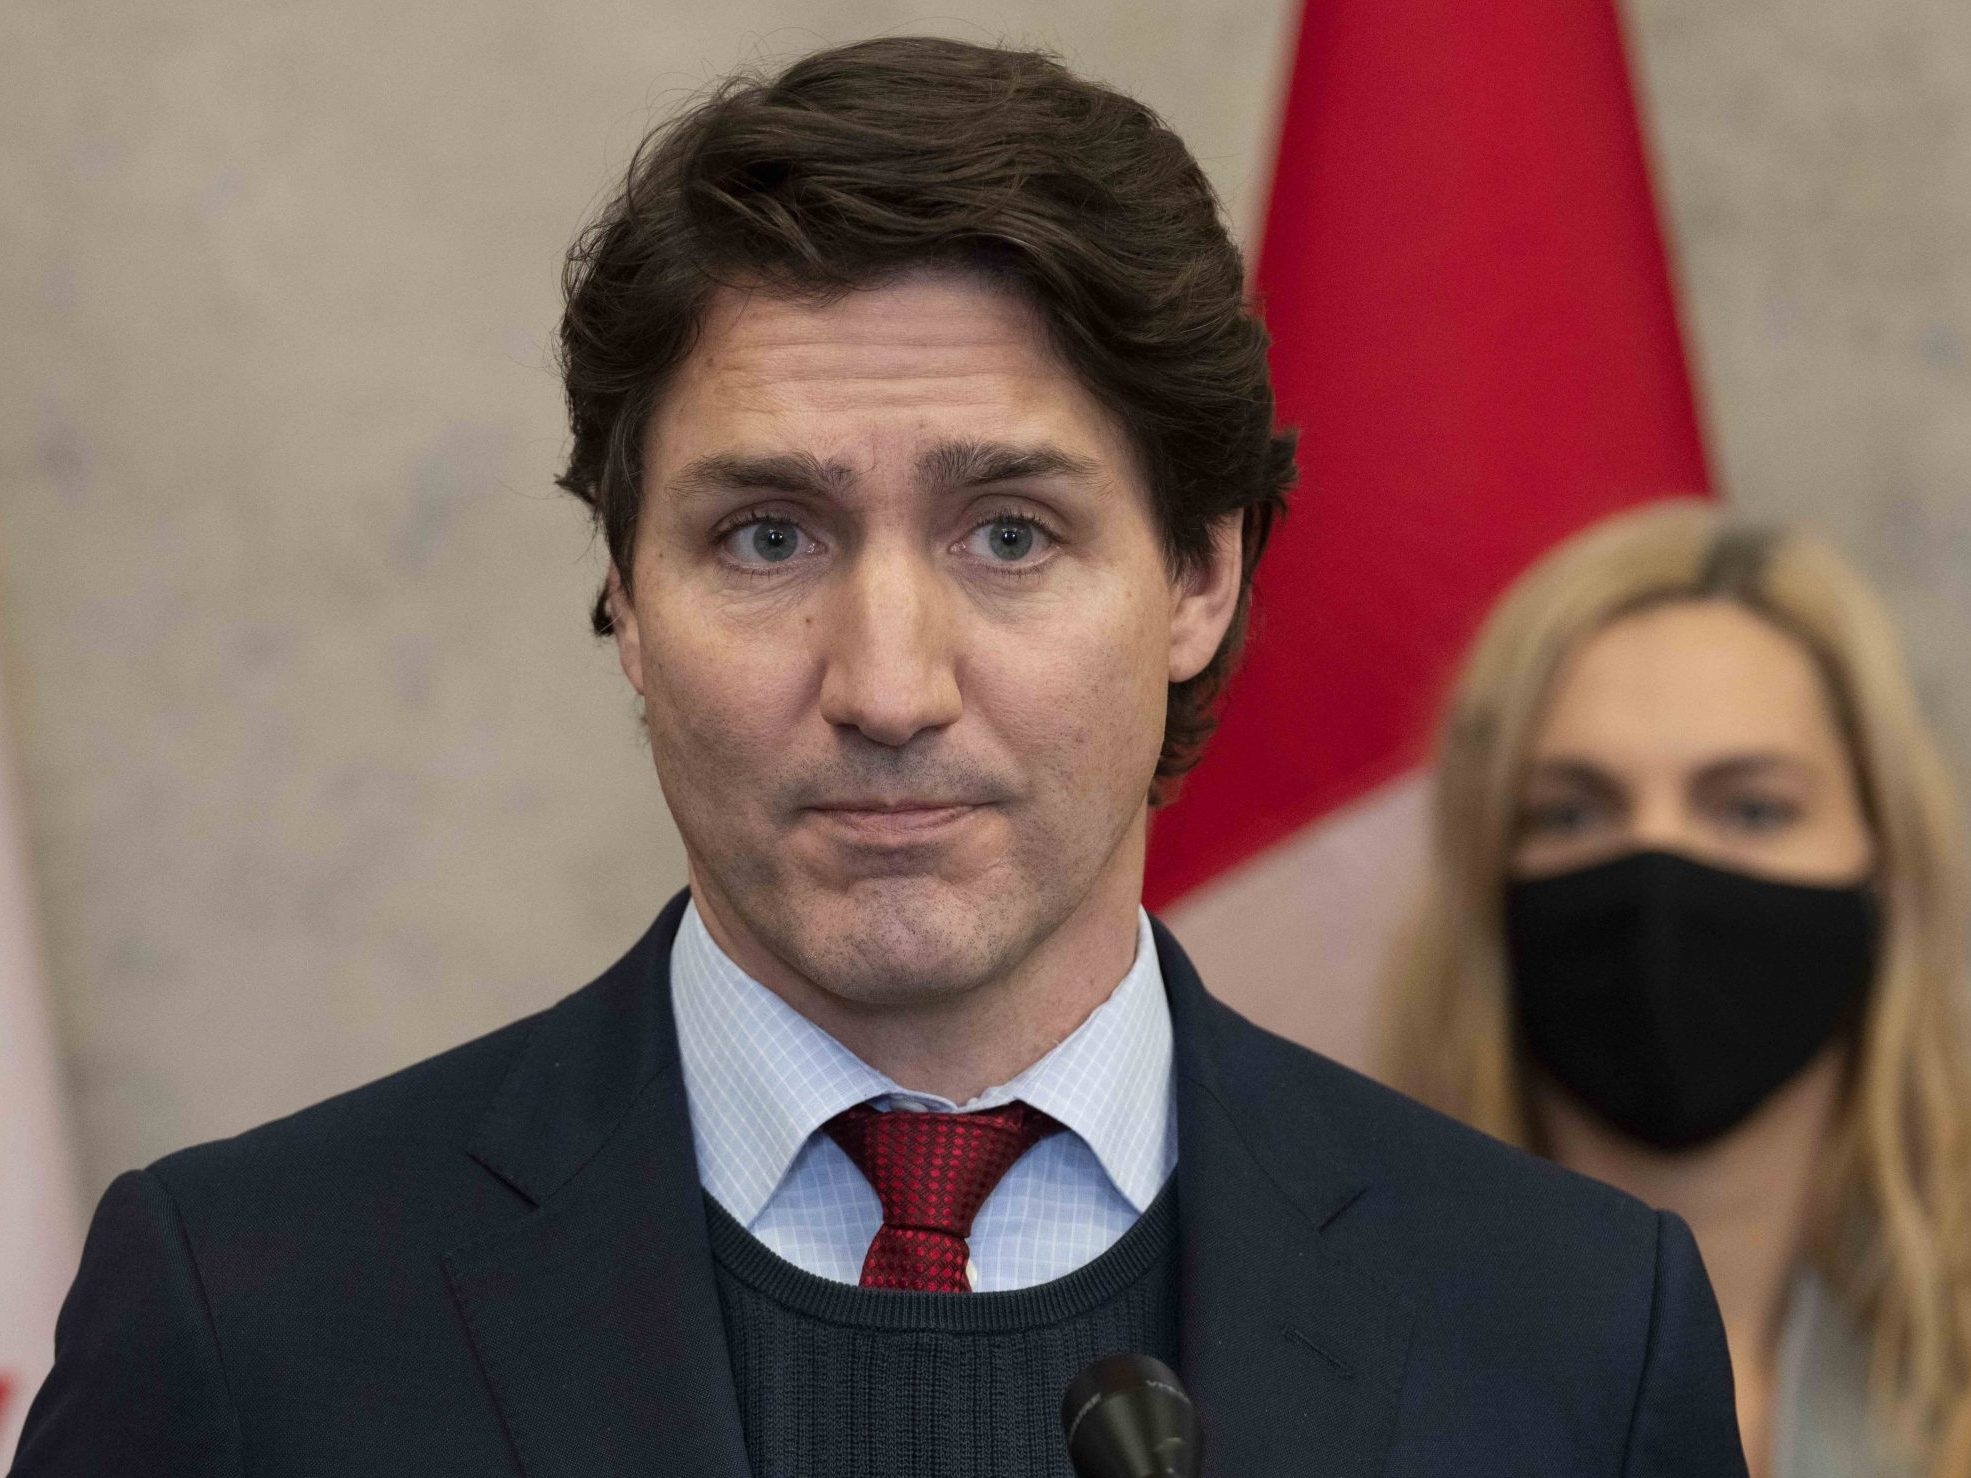 LILLEY UNLEASHED: Trudeau continues to turn a blind eye to China's security threats